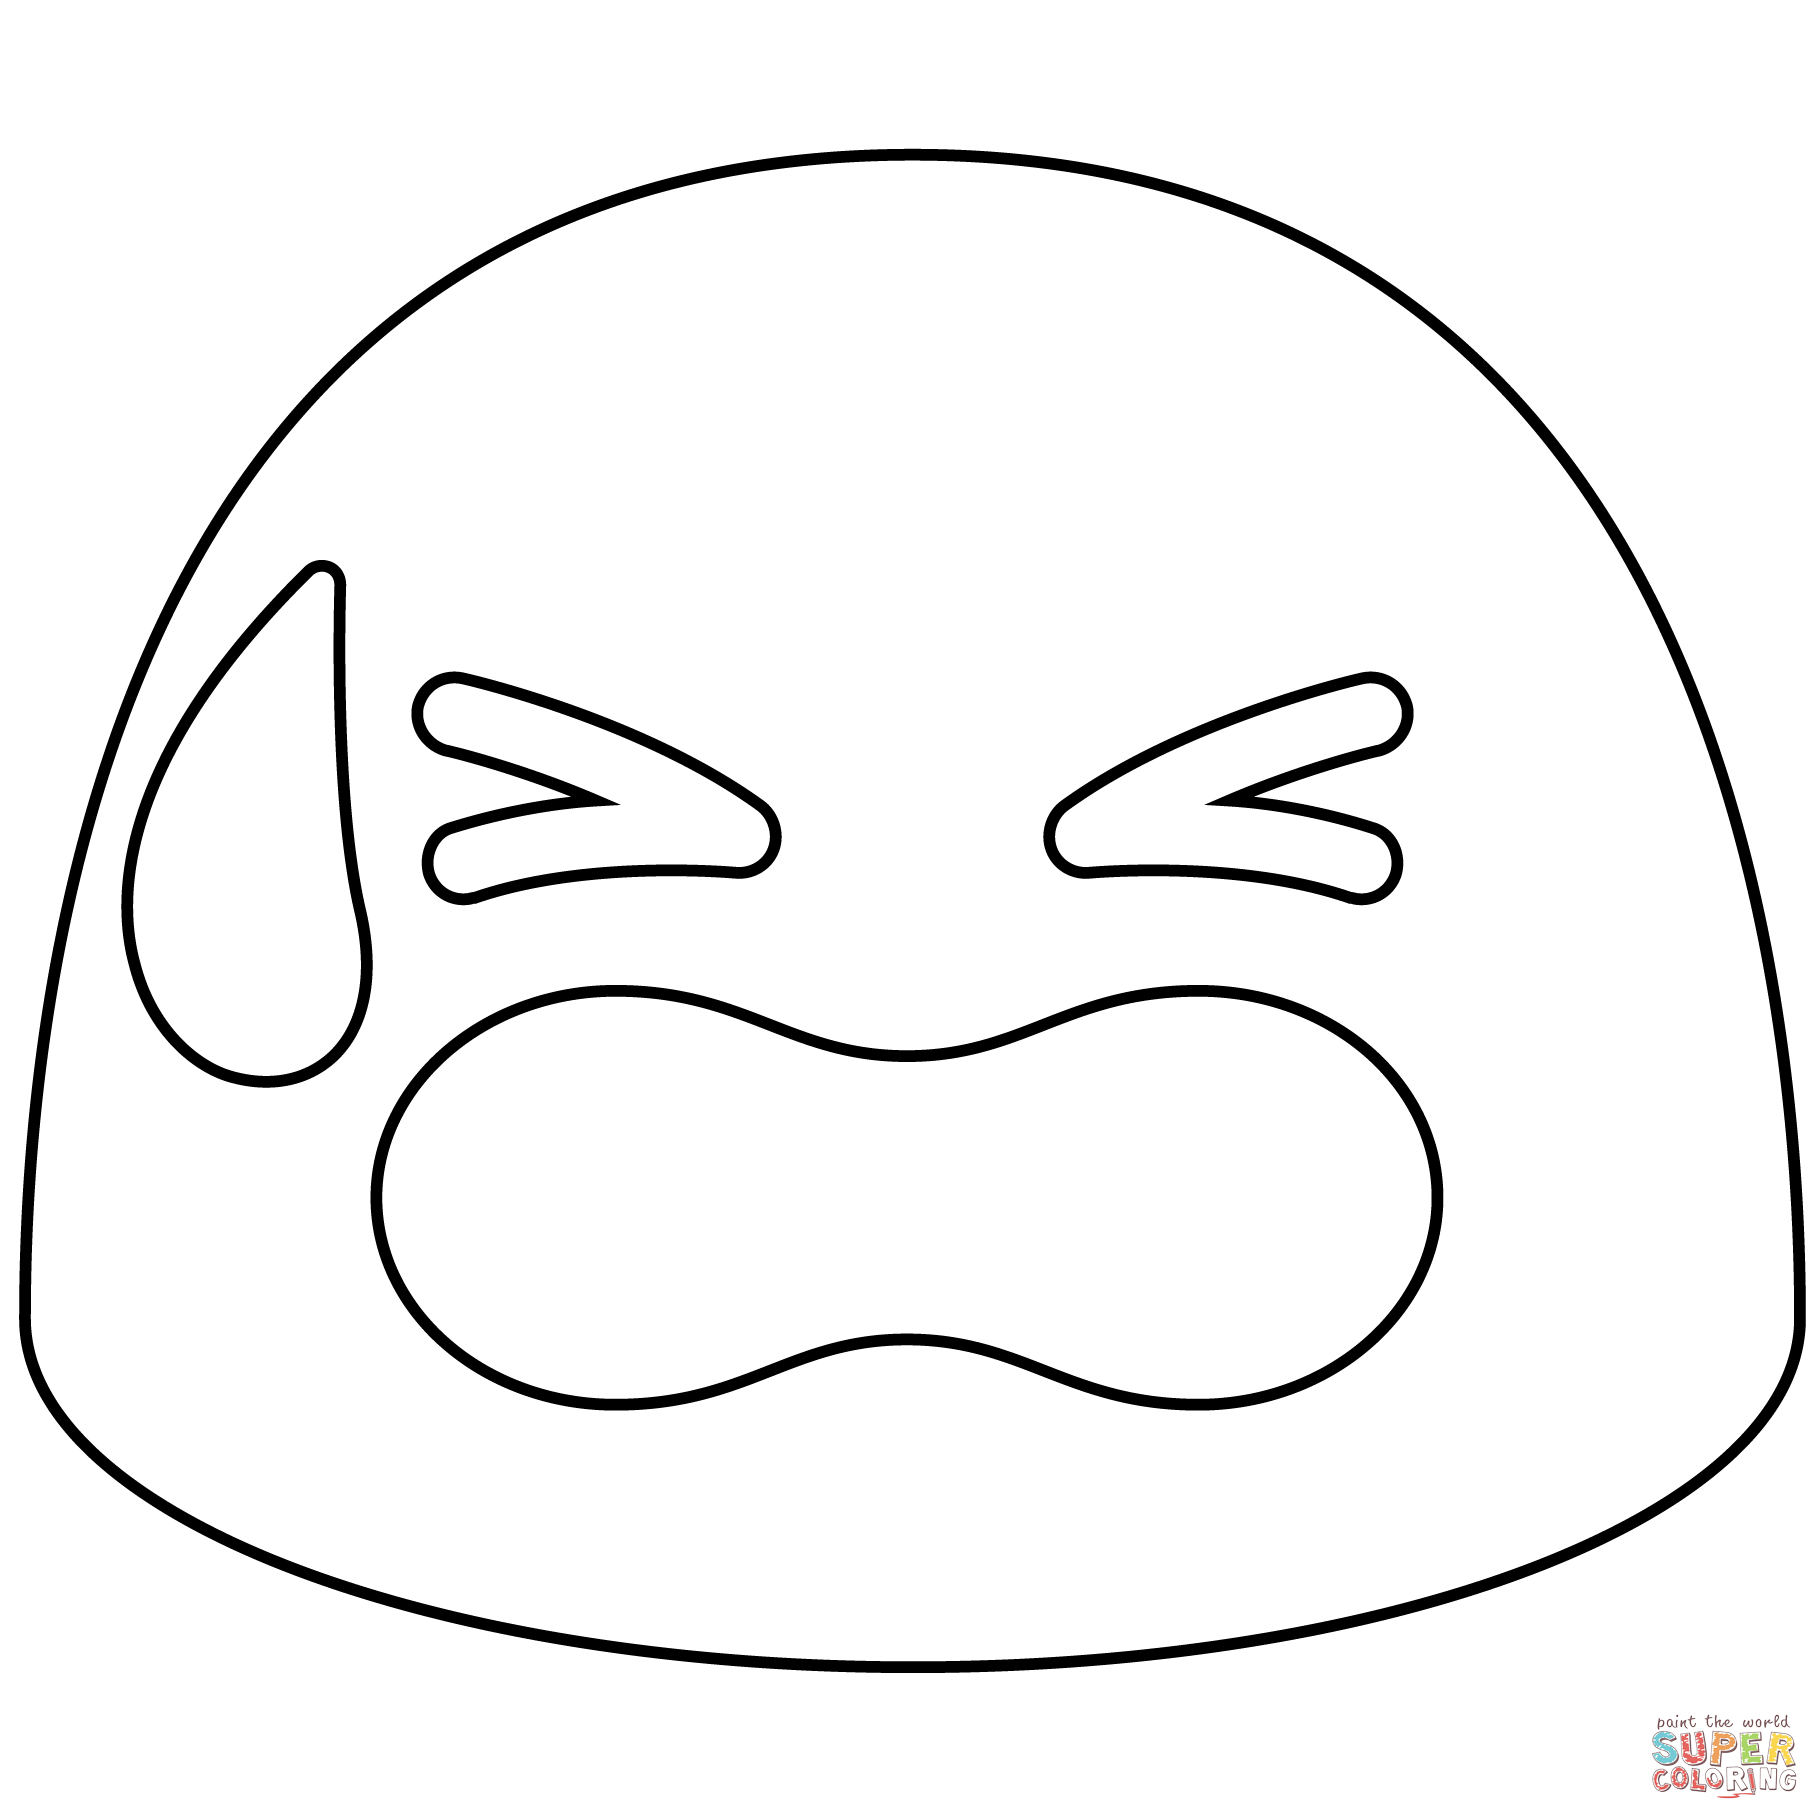 Tired face emoji coloring page free printable coloring pages